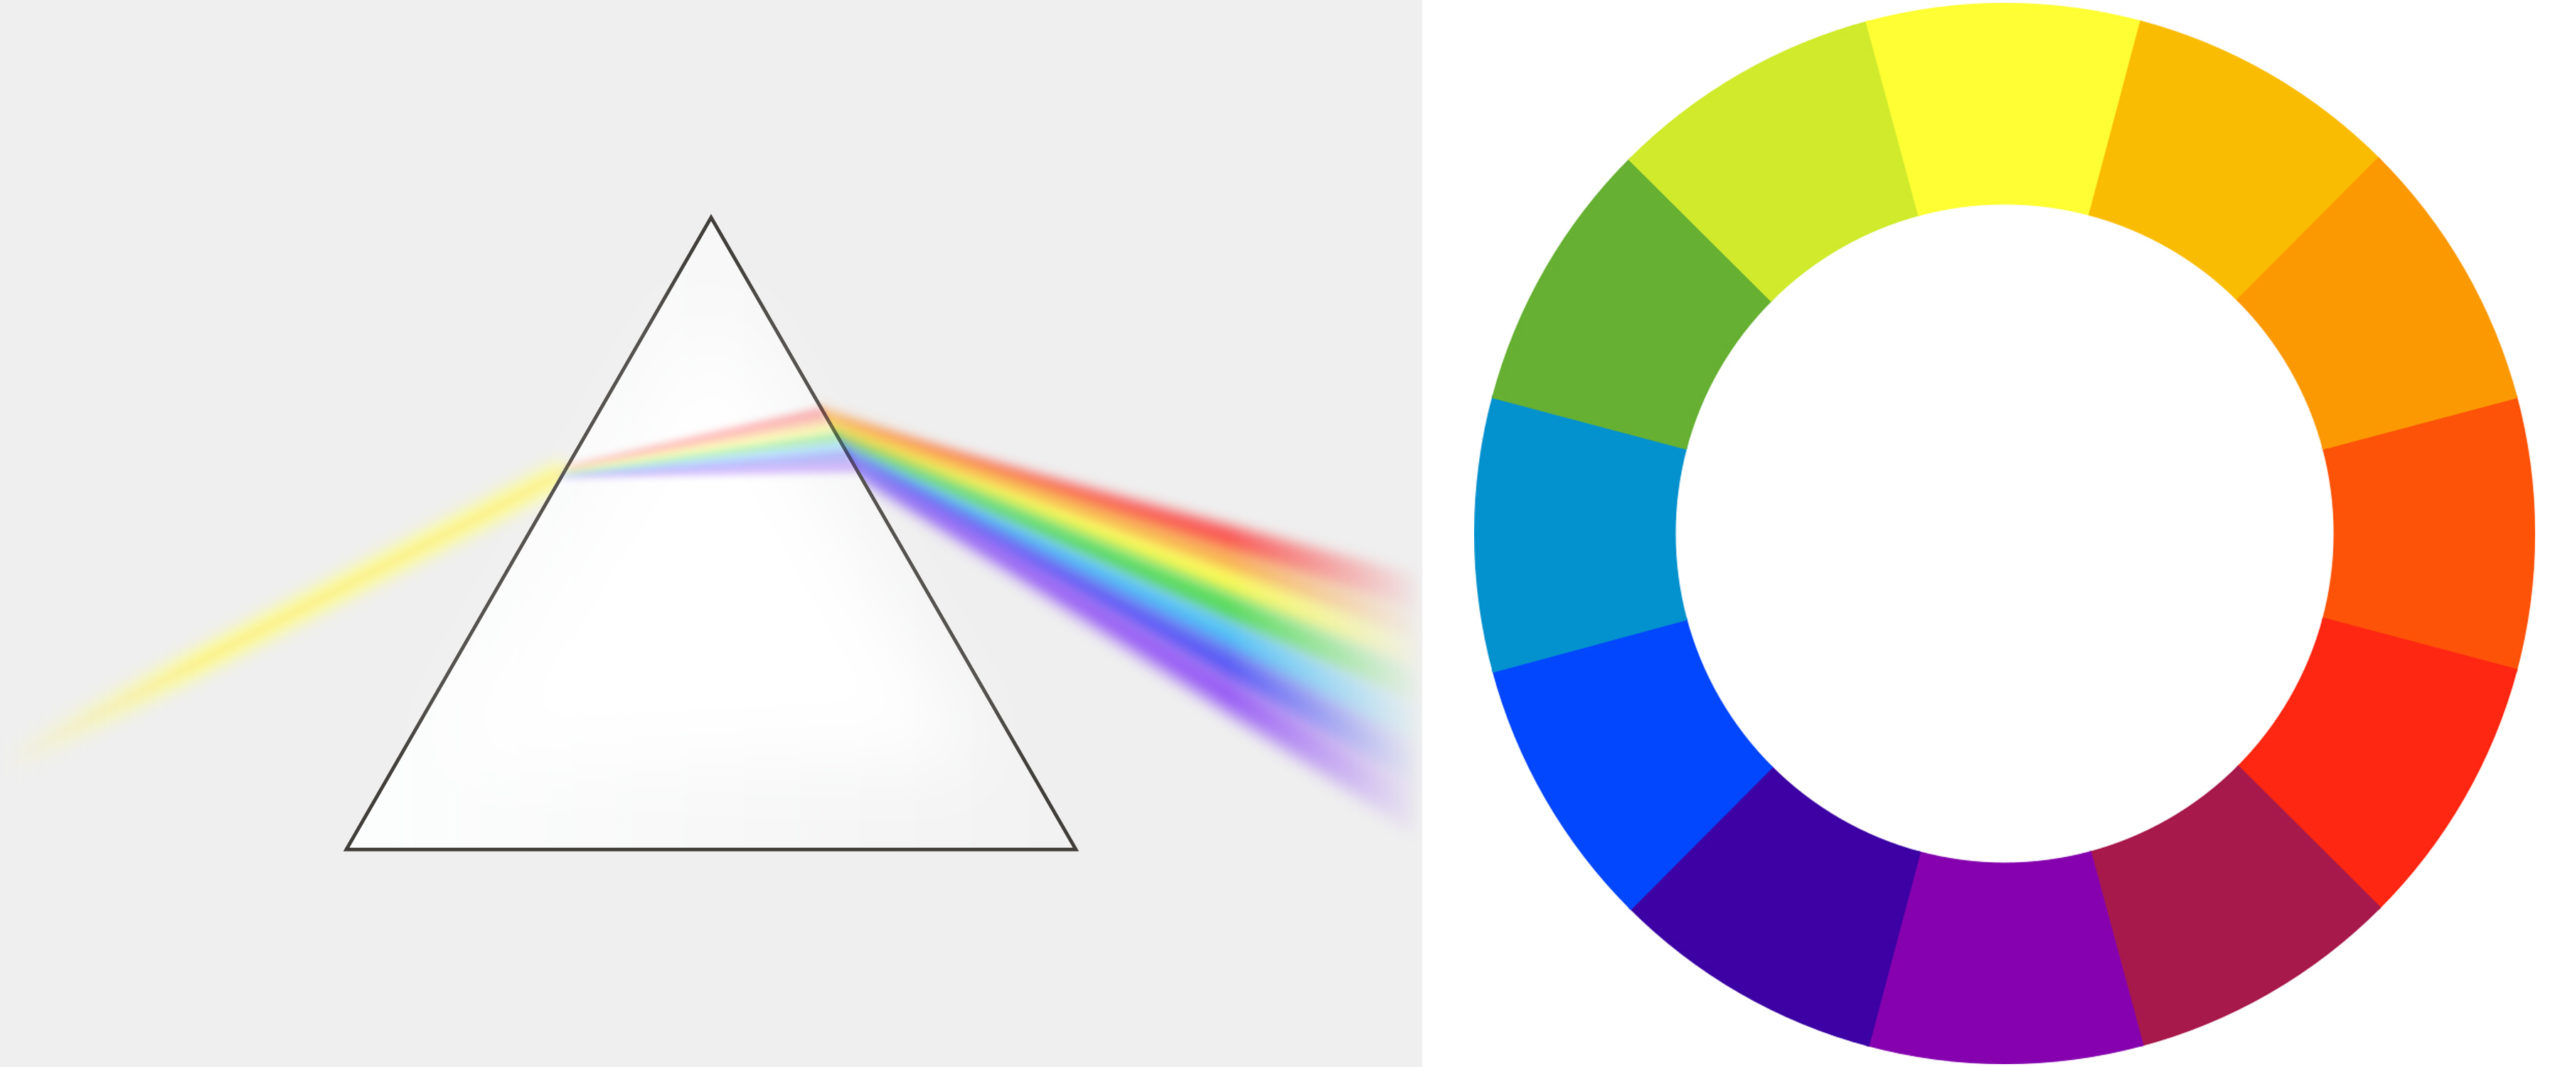 Left: A prism breaking visible light into the color spectrum; Right: The color wheel